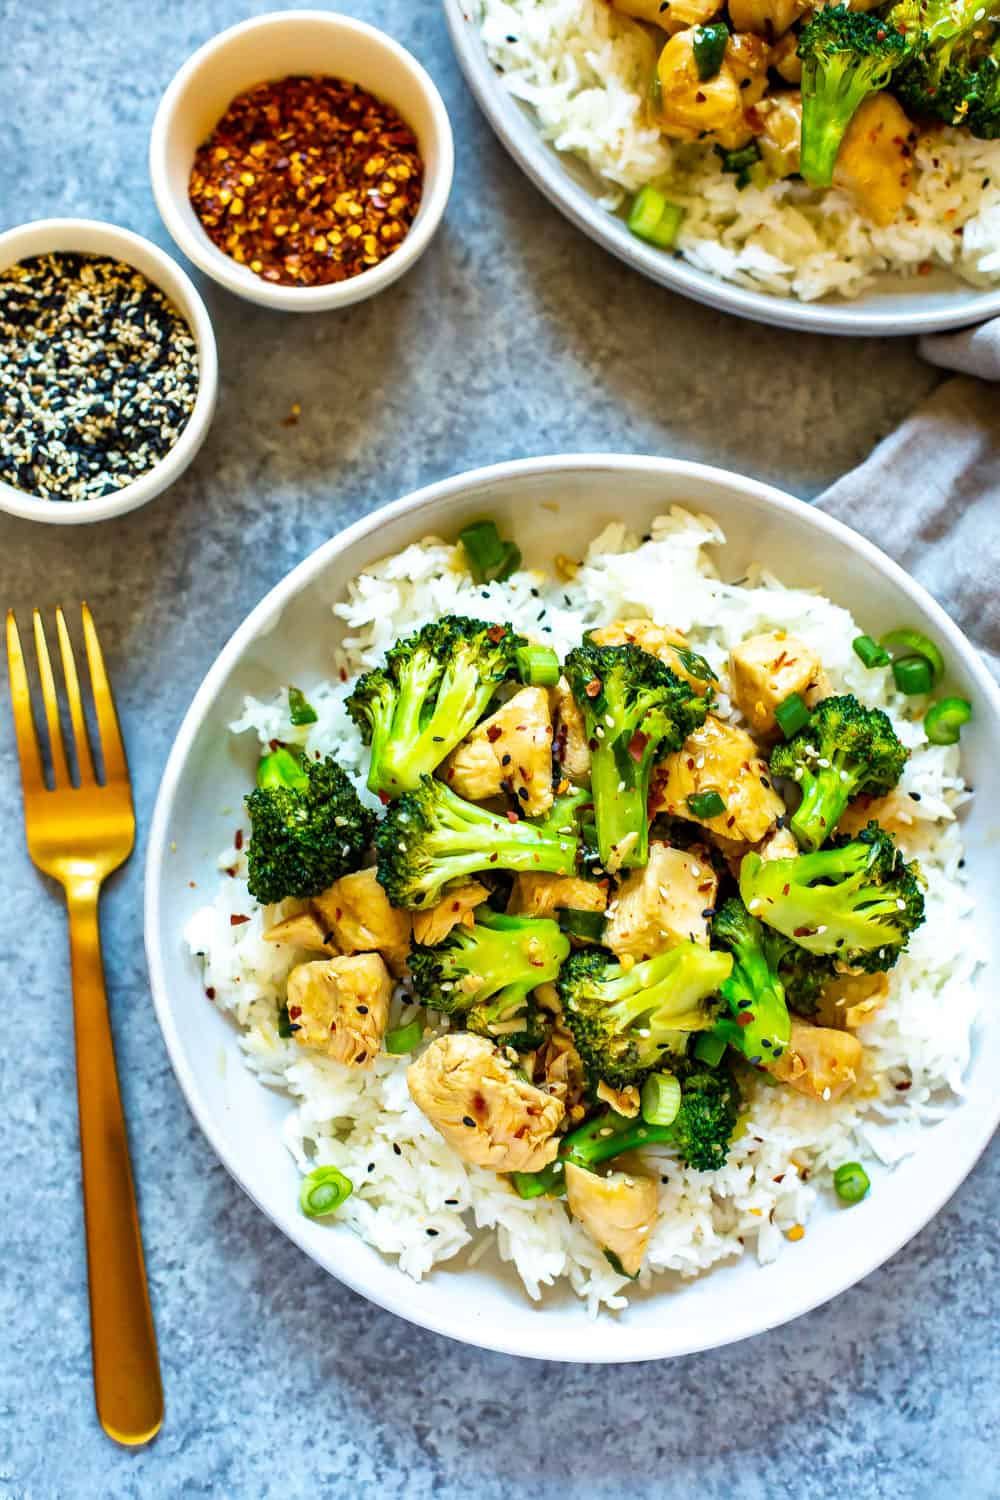 This Instant Pot Chinese Chicken and Broccoli is a healthy one pot stir fry recipe using pantry staples that comes together in less than 30 minutes!